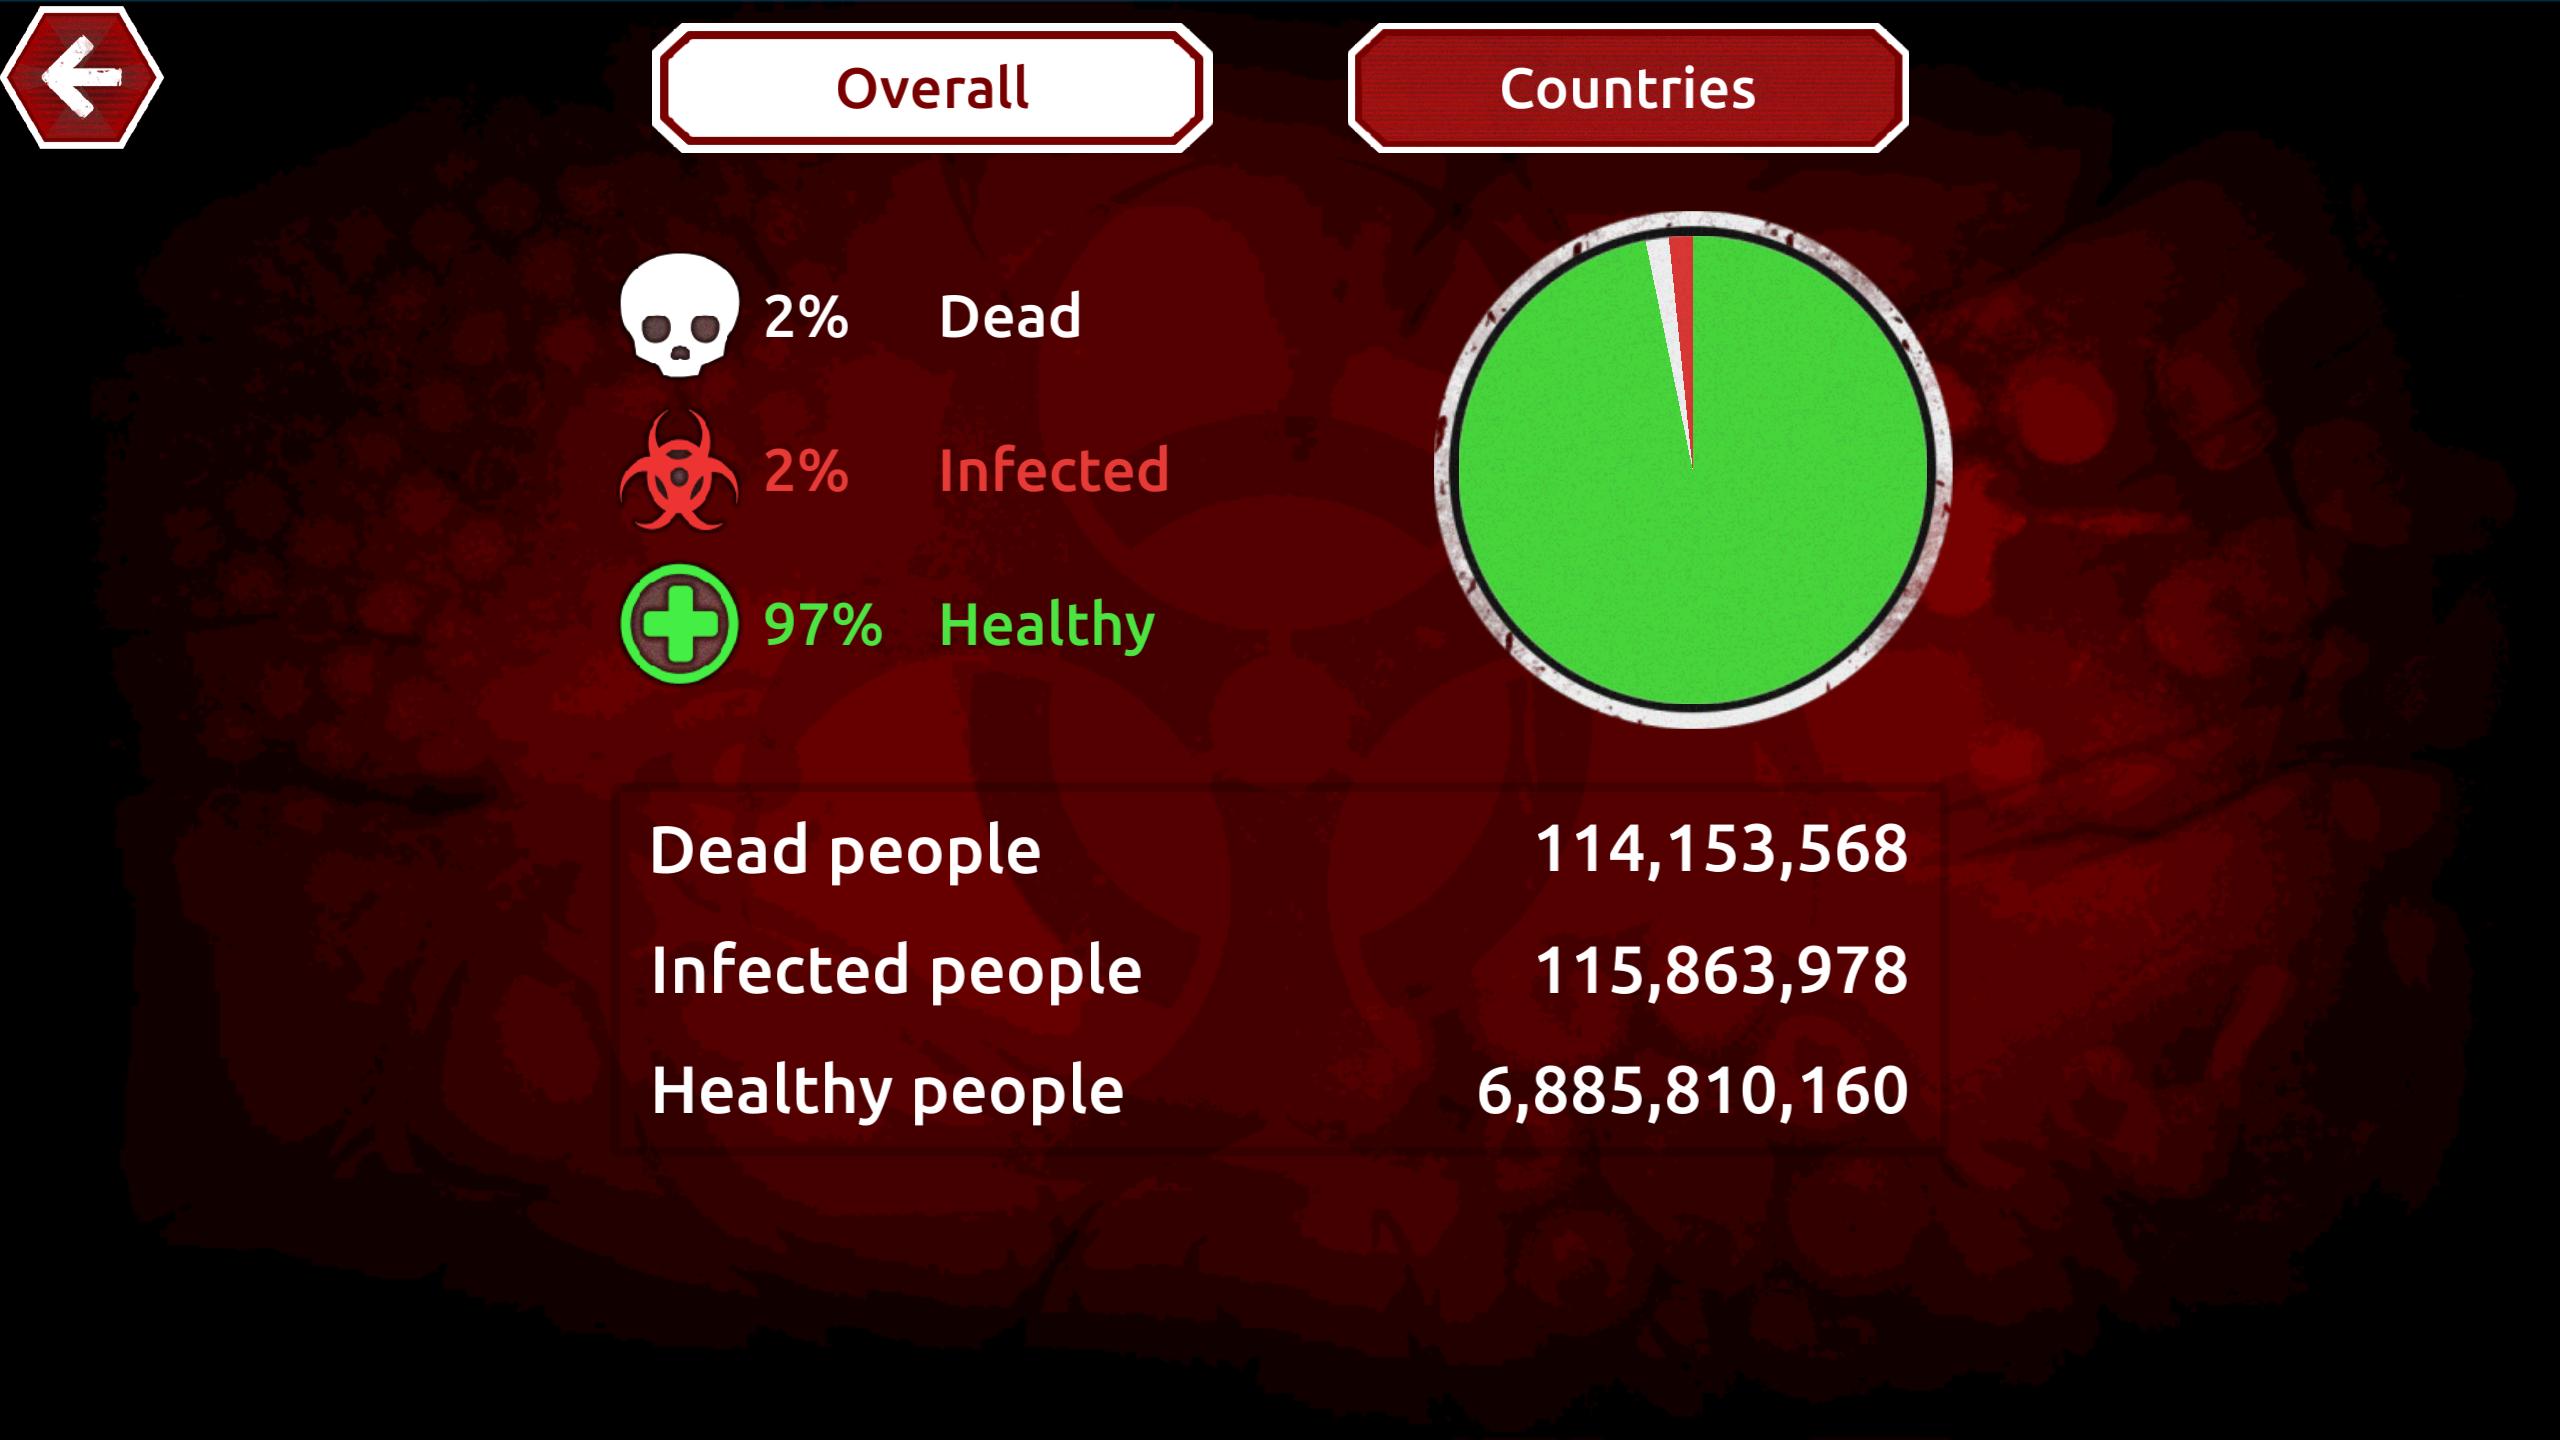 Viruses, Plagues, and History. The last game вирусы